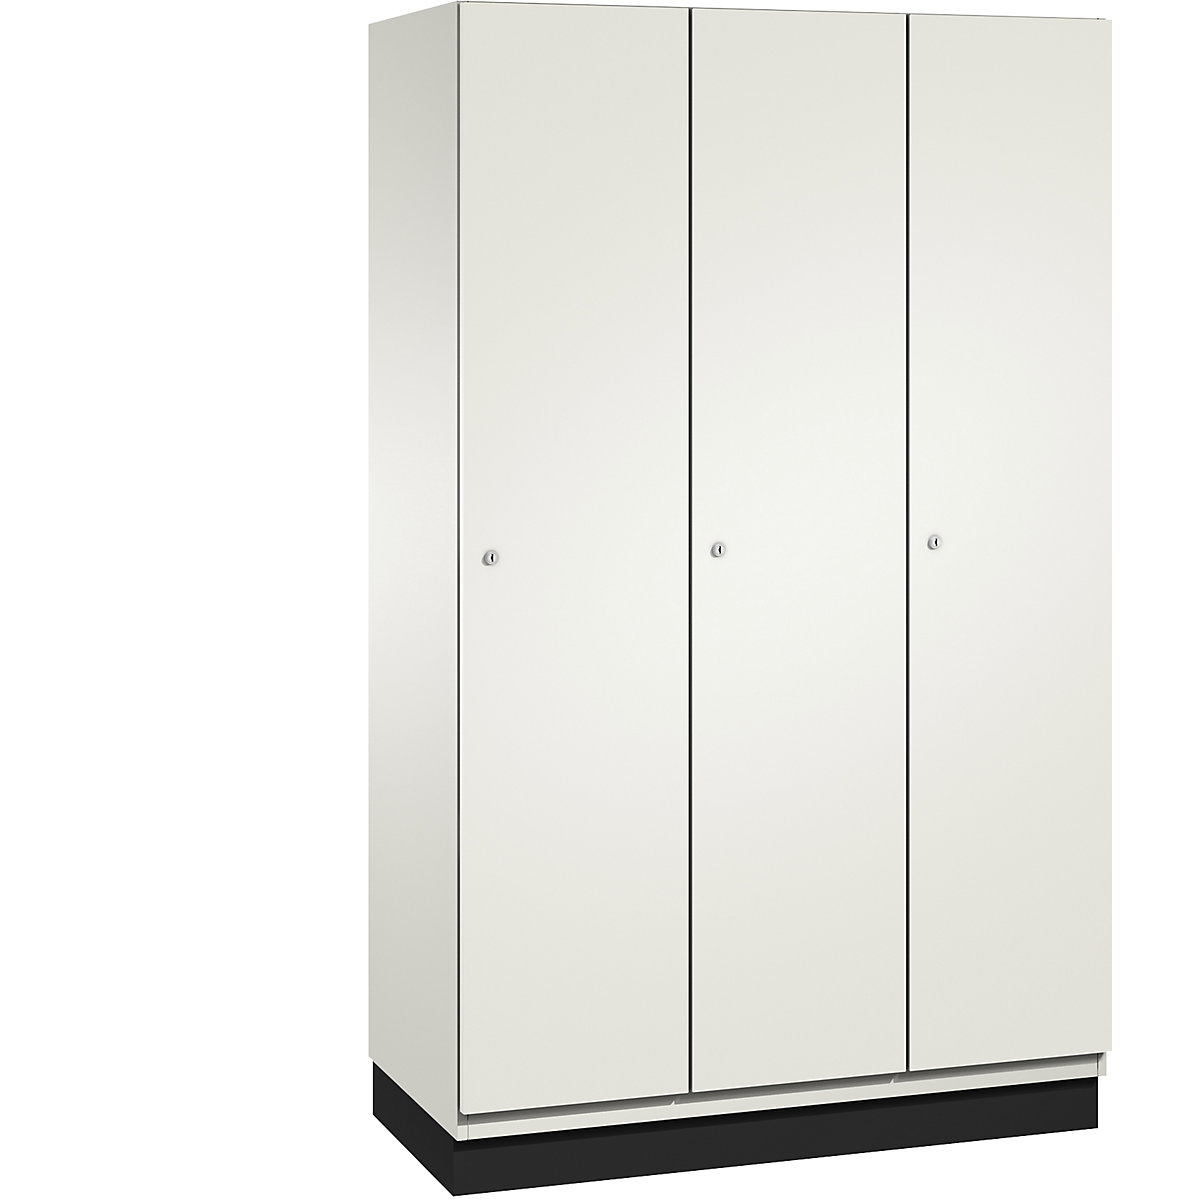 CAMBIO cloakroom locker unit with HPL doors – C+P, 3 compartments, body pure white / door white, width 1200 mm-1